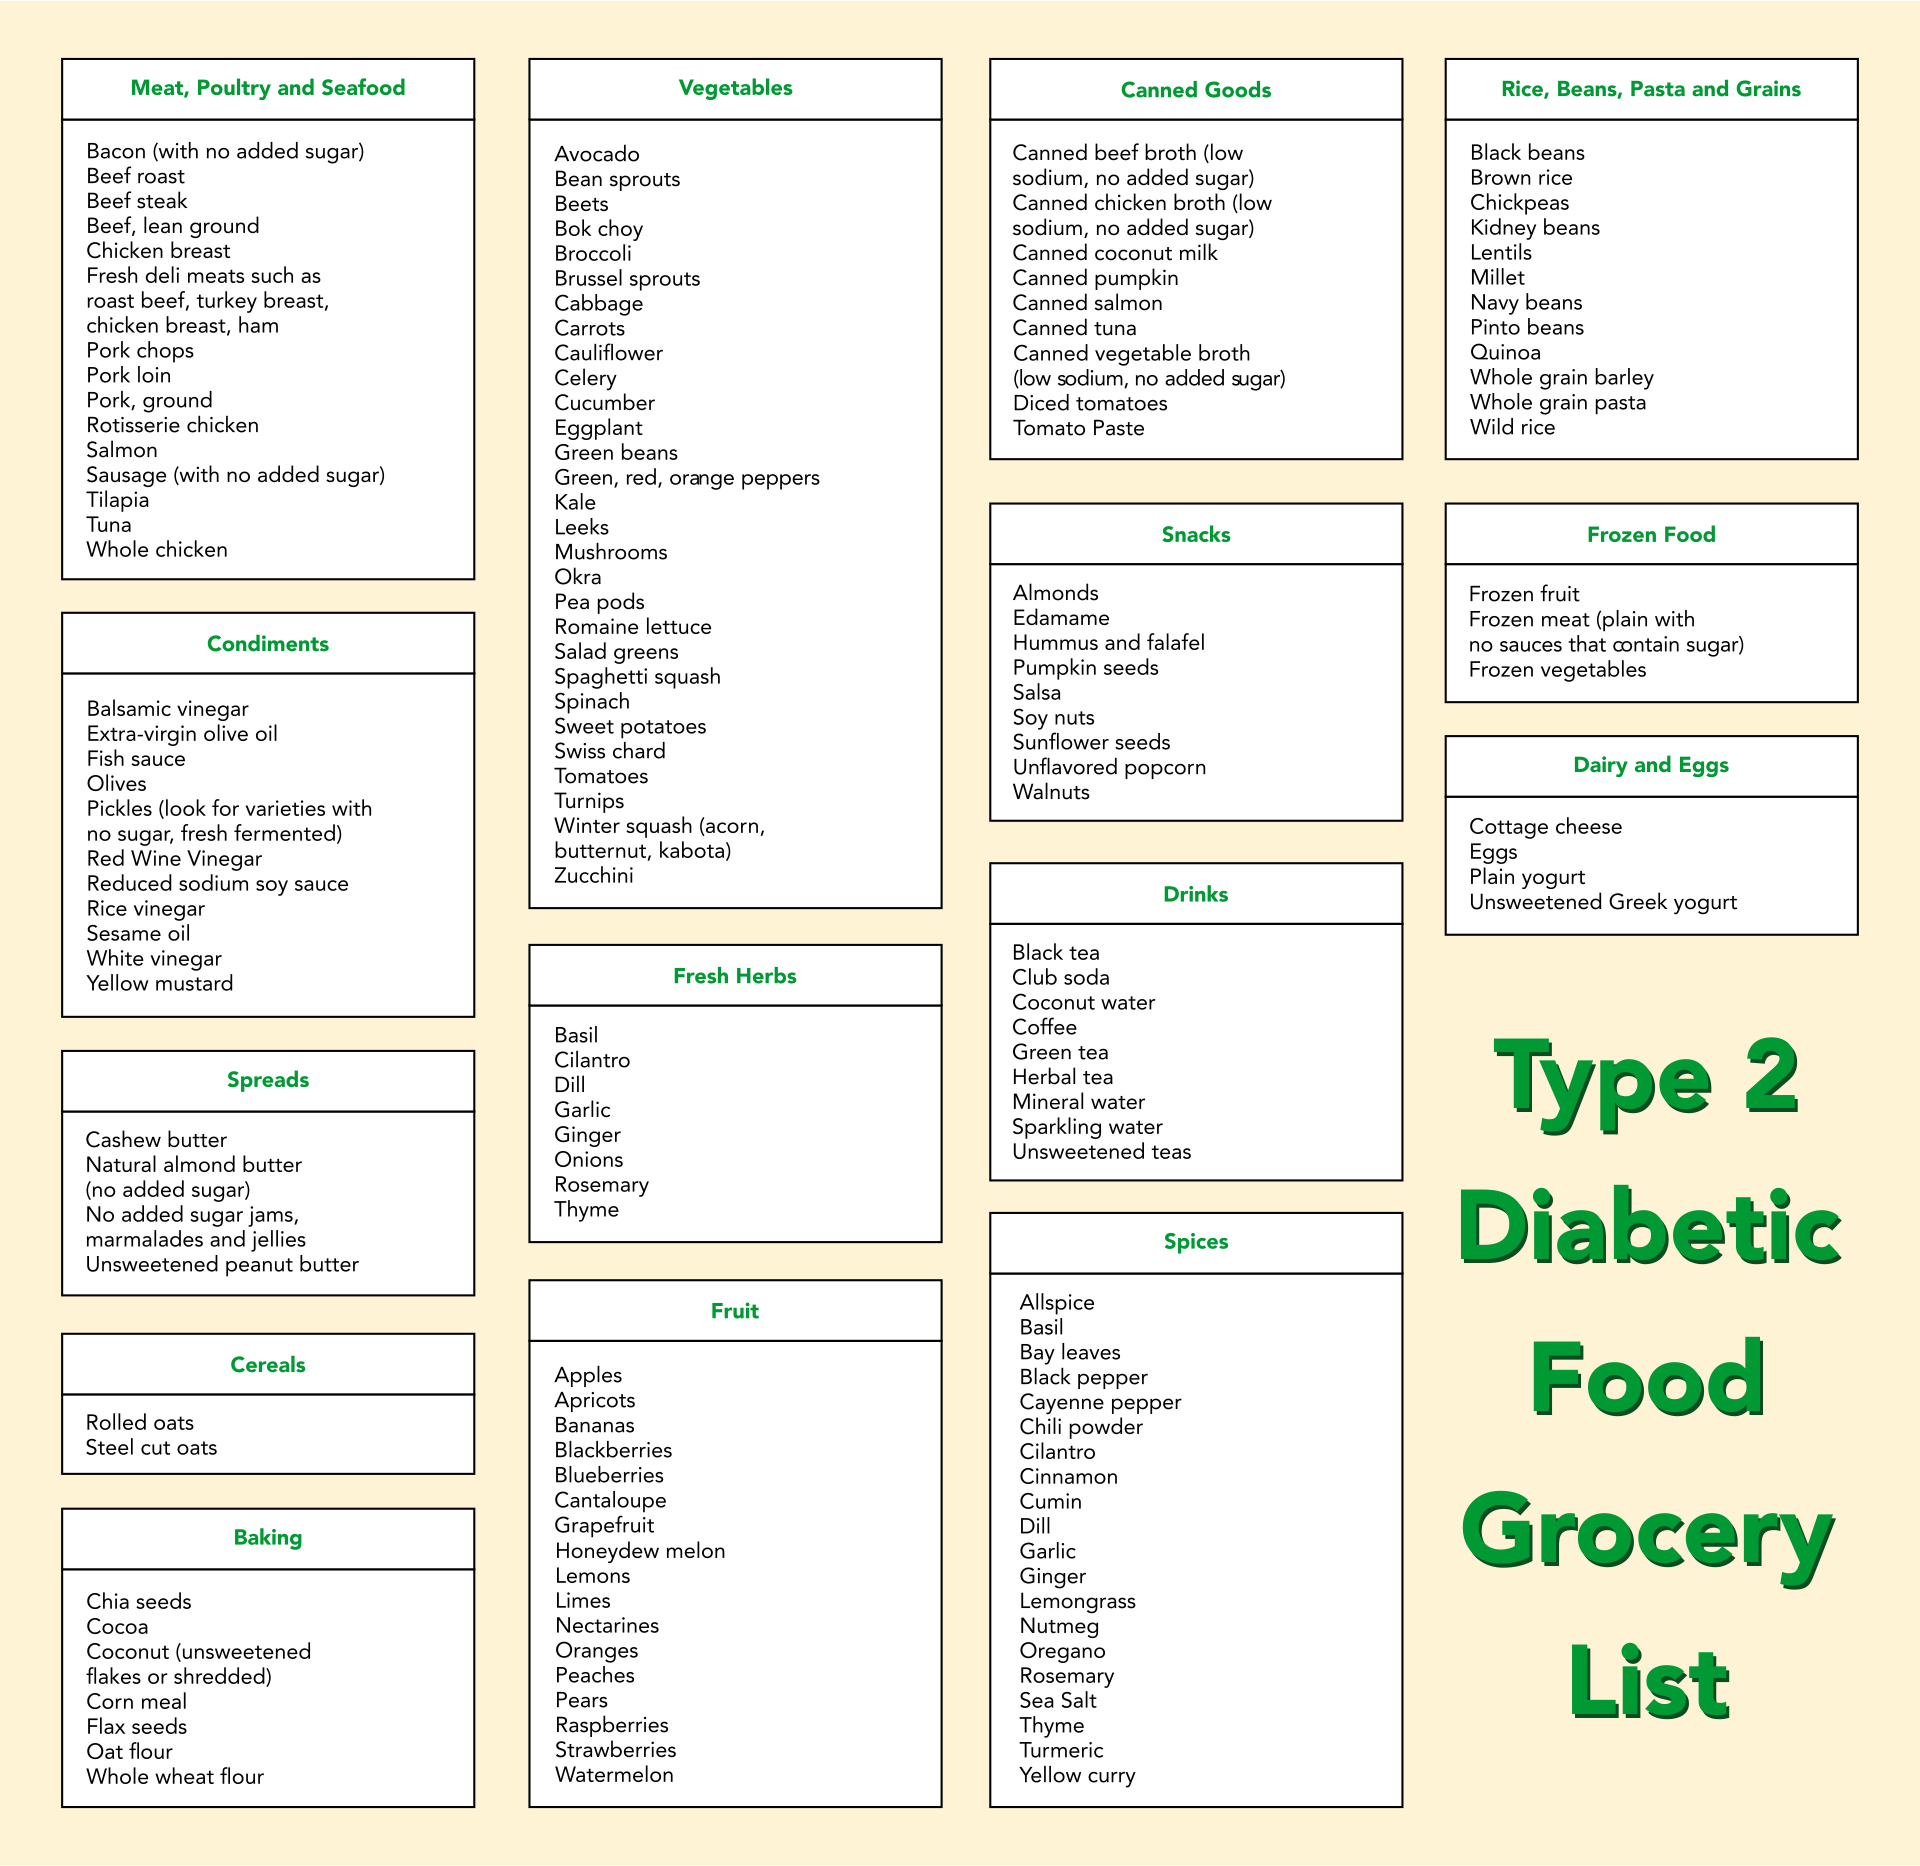 Best Printable Diabetic Grocery List Pdf For Free At Printablee | The ...